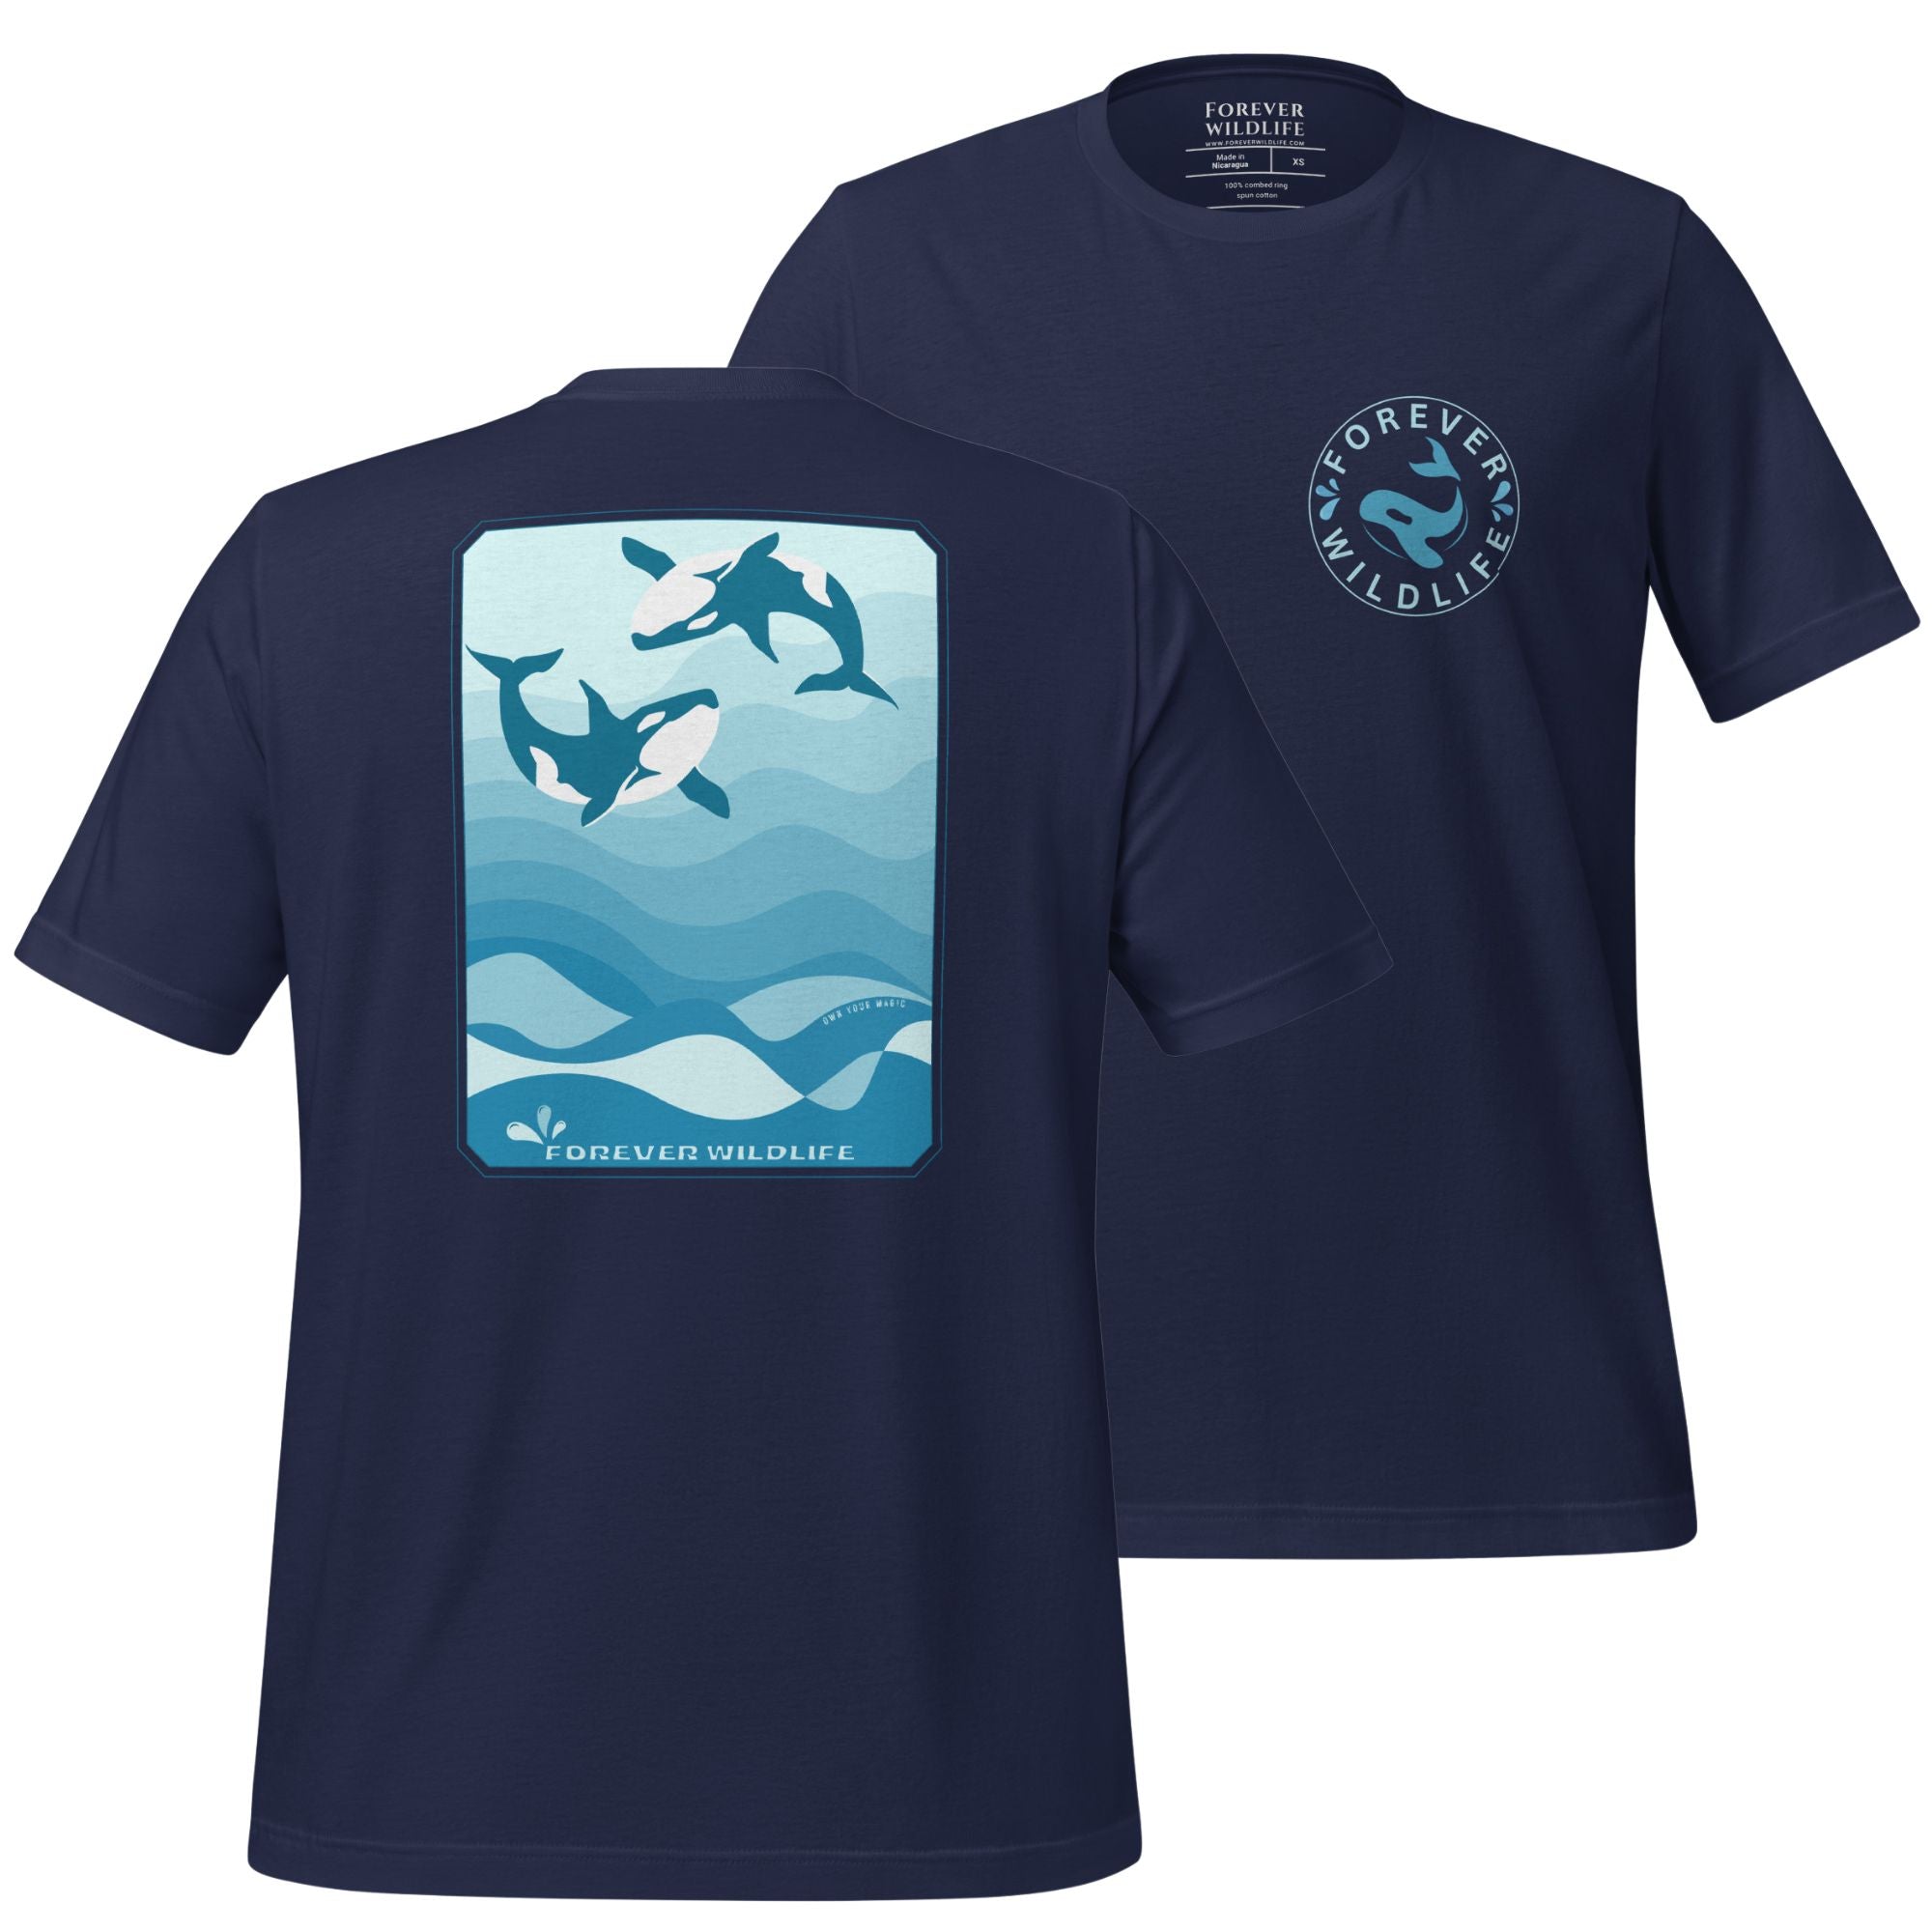 Orca Shirt, beautiful Navy Orca T-Shirt with Killer Whales on the shirt by Forever Wildlife selling Wildlife T Shirts.